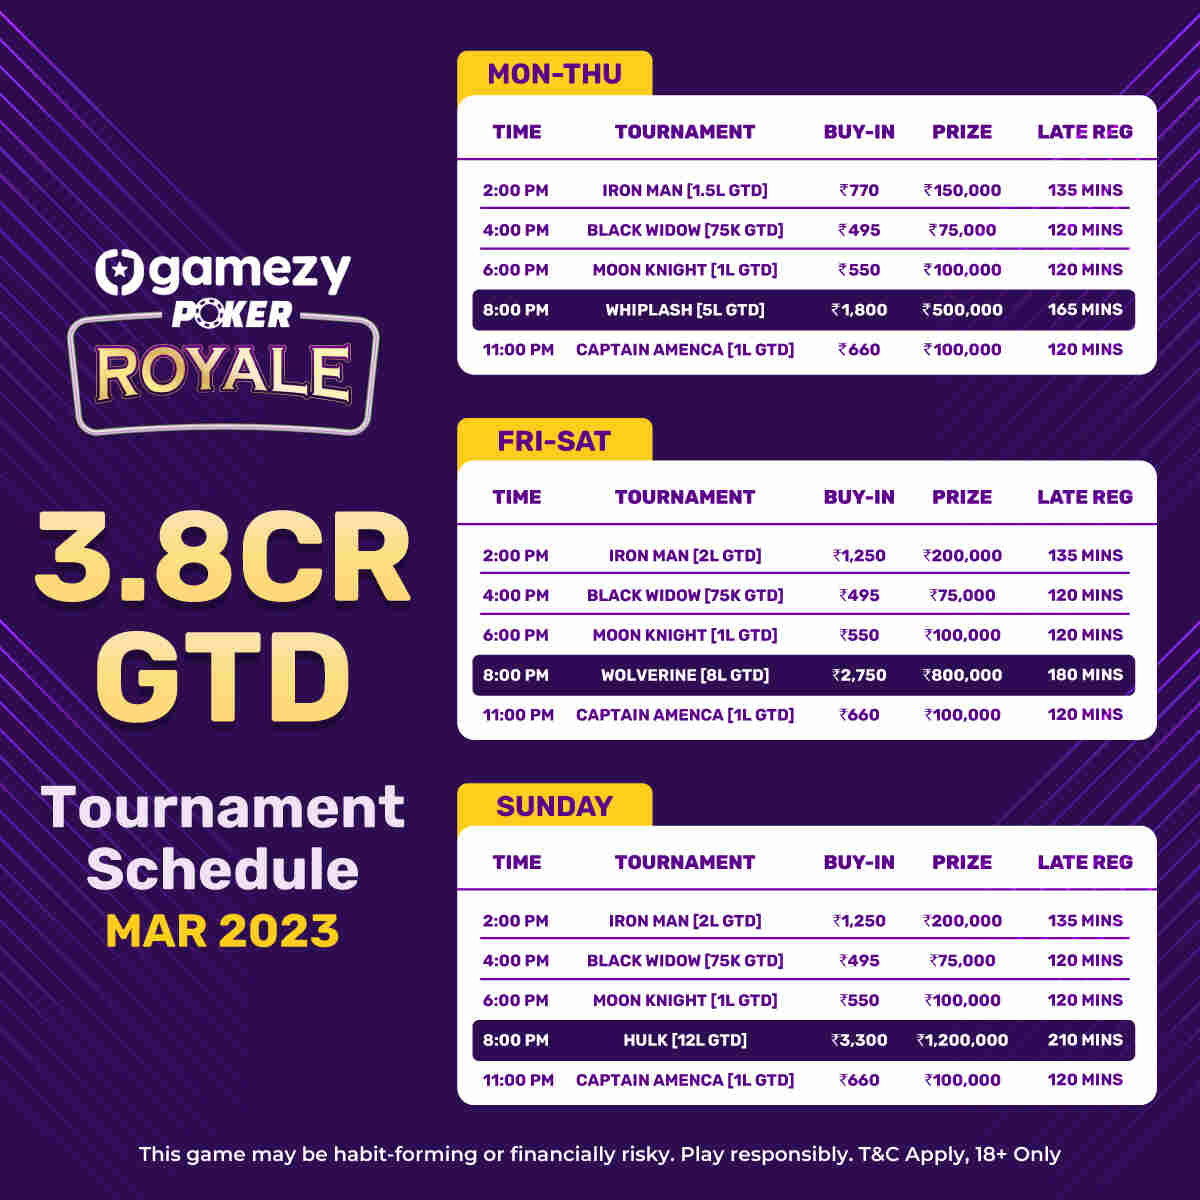 Gamezy Has Multi Table Tournaments Ready Worth 3.8 Crore GTD